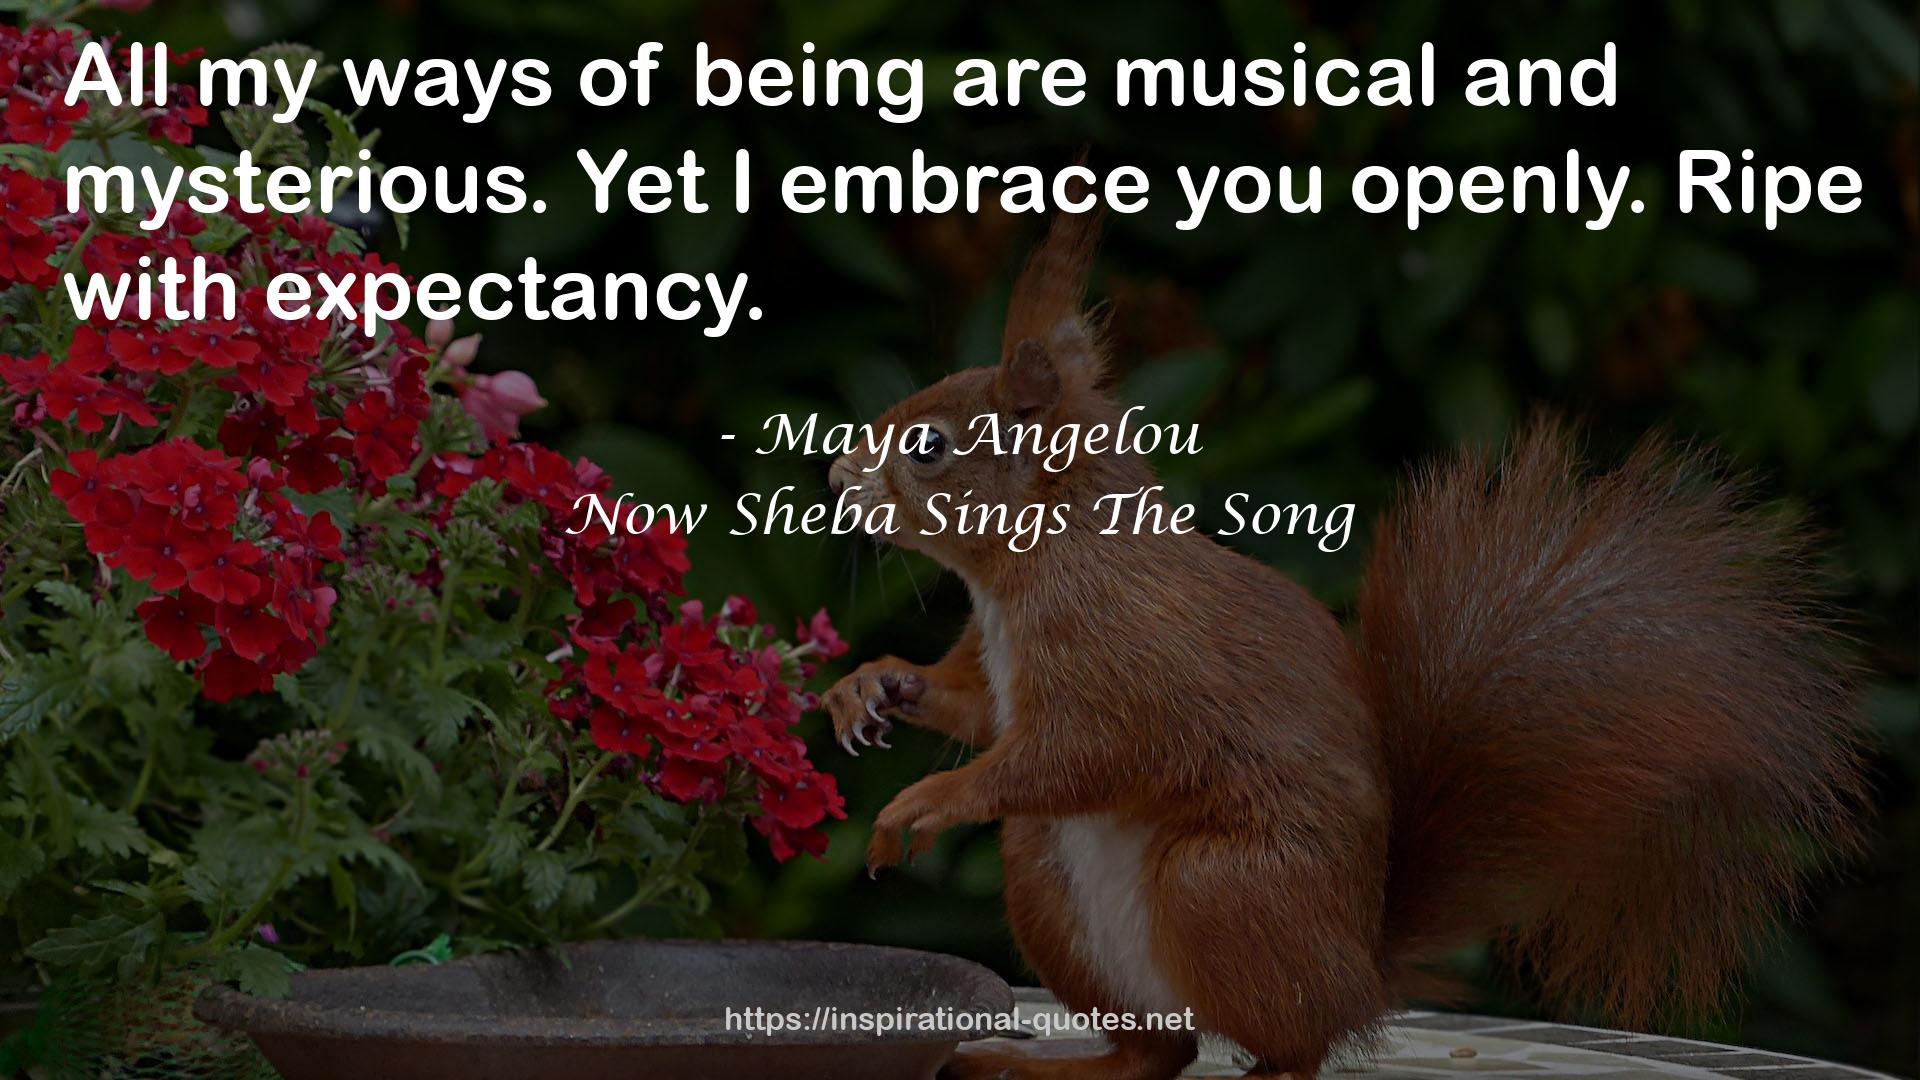 Now Sheba Sings The Song QUOTES